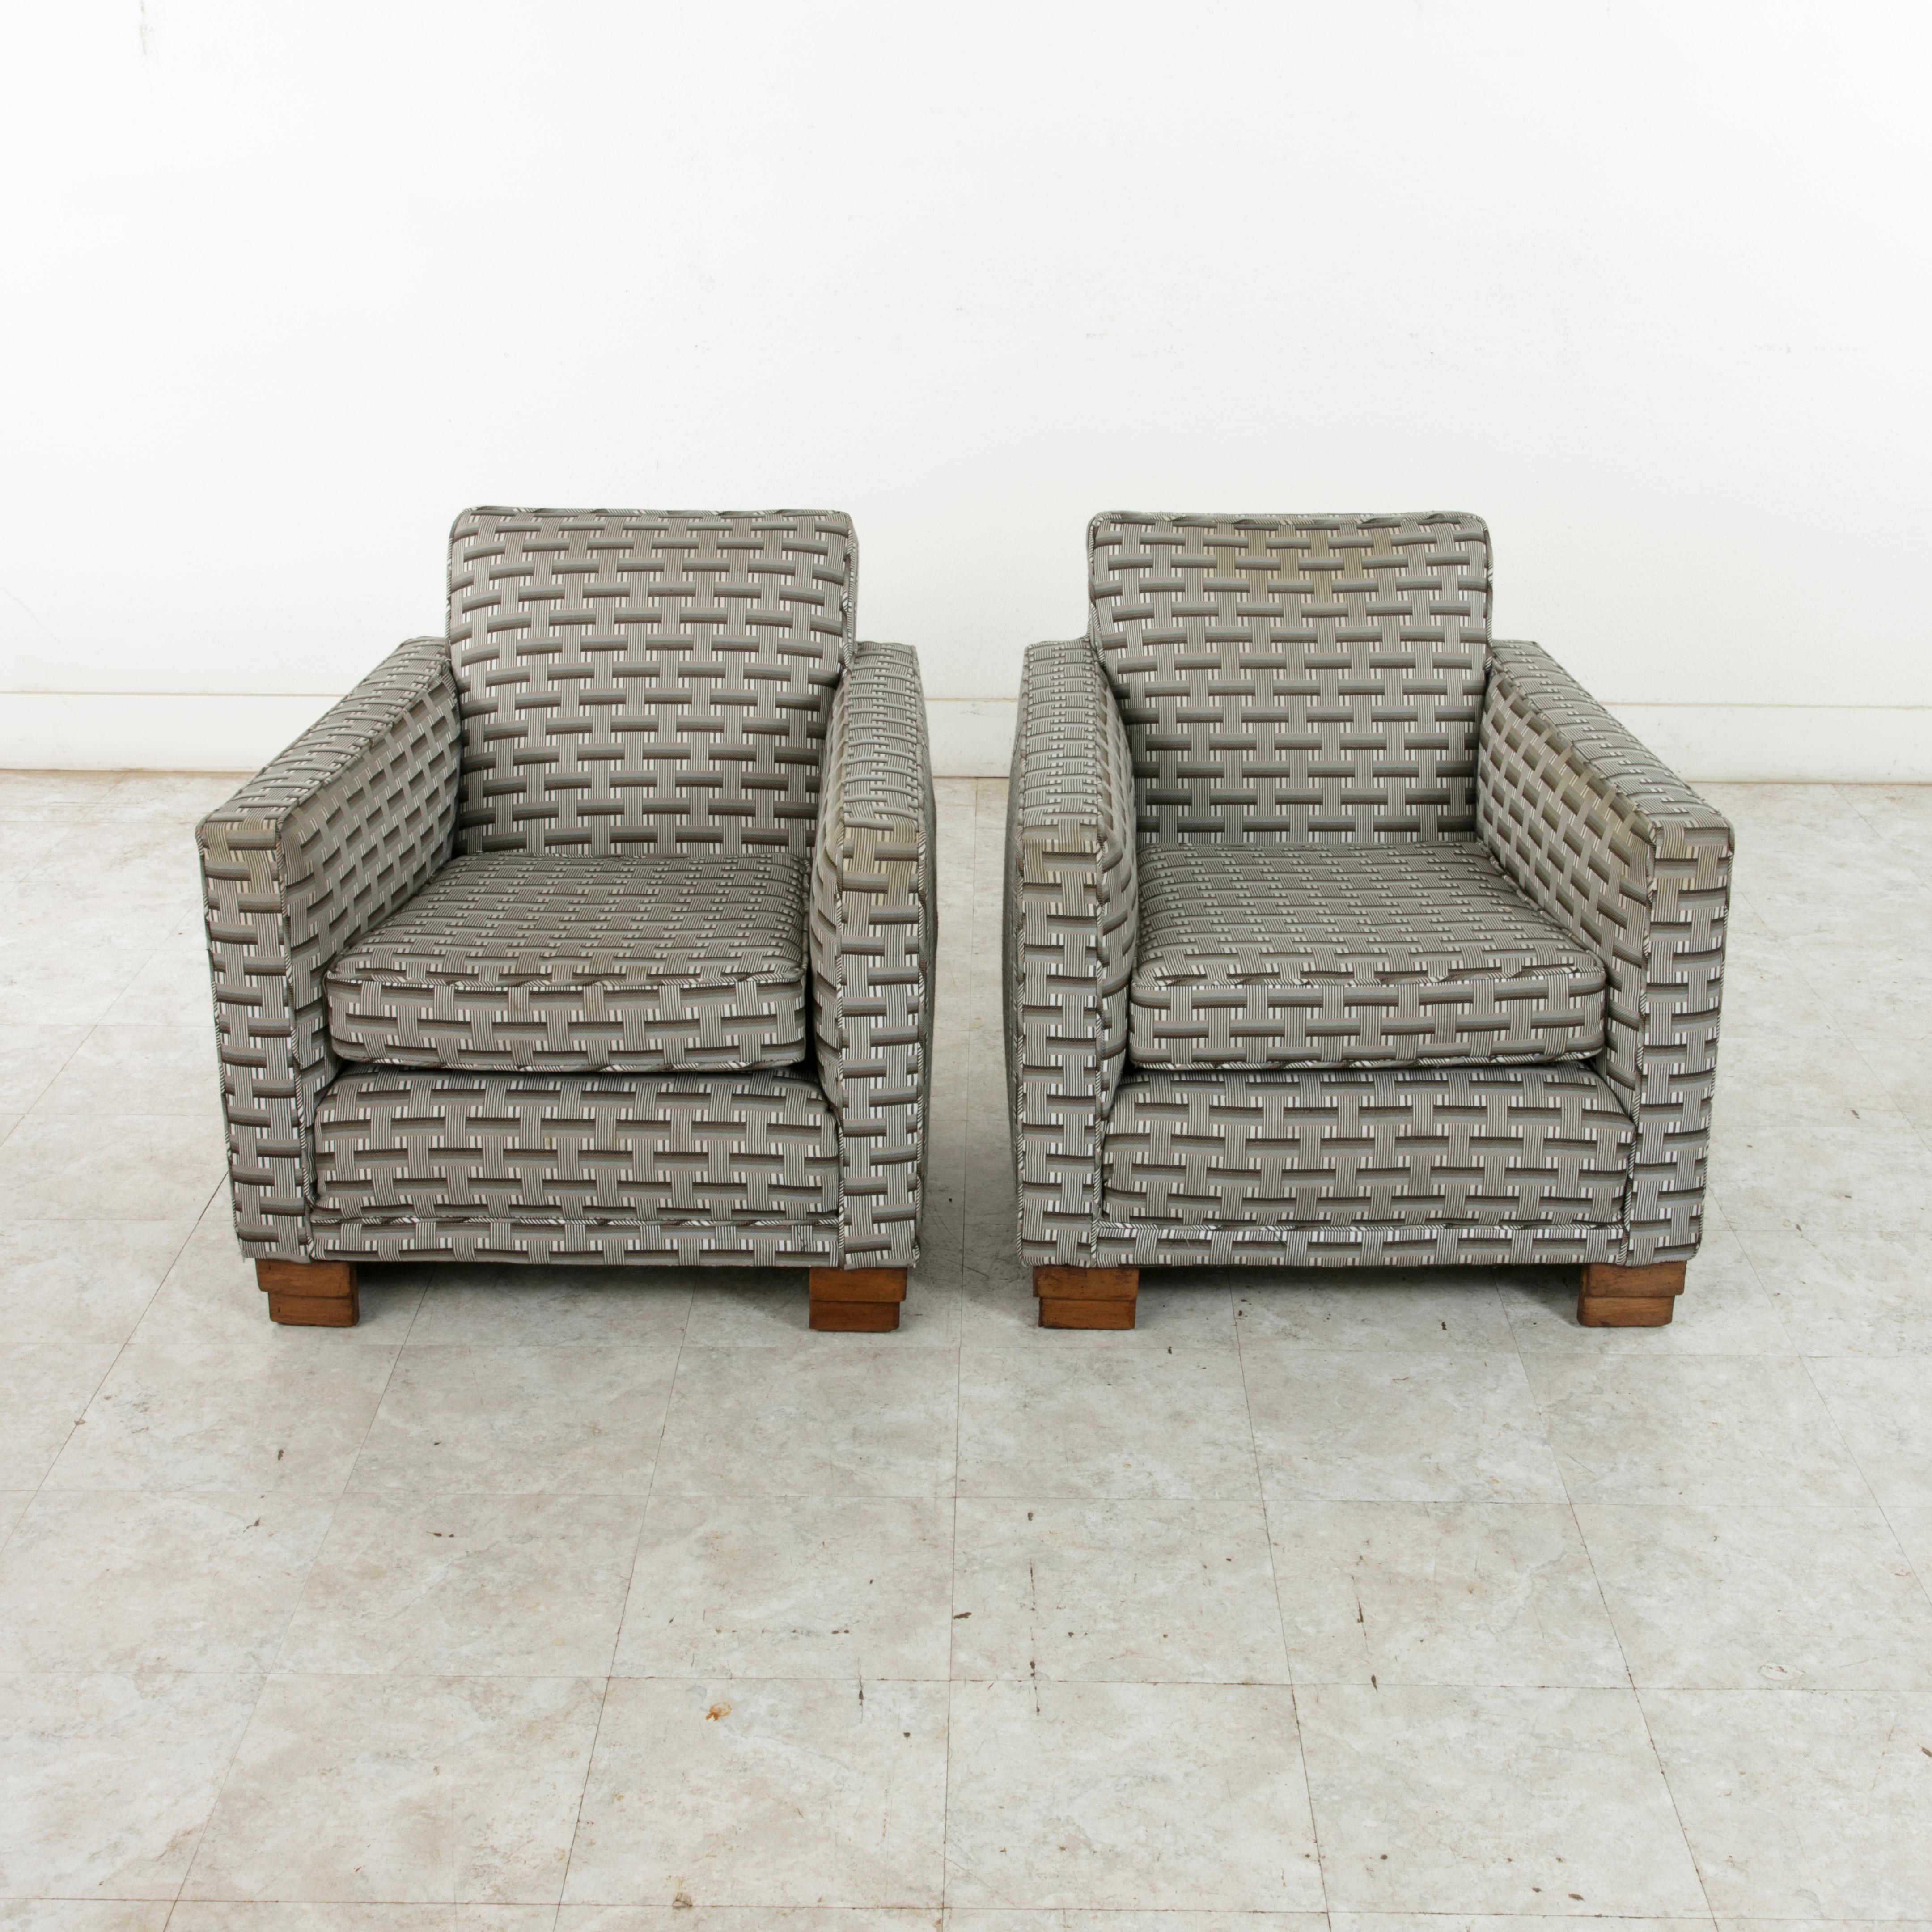 This pair of early 20th century French Art Deco period club chairs or lounge chairs features a grey geometric patterned upholstery, typical of the period. Resting on solid oak runner feet, this very comfortable pair boasts a wonderful scale to fit